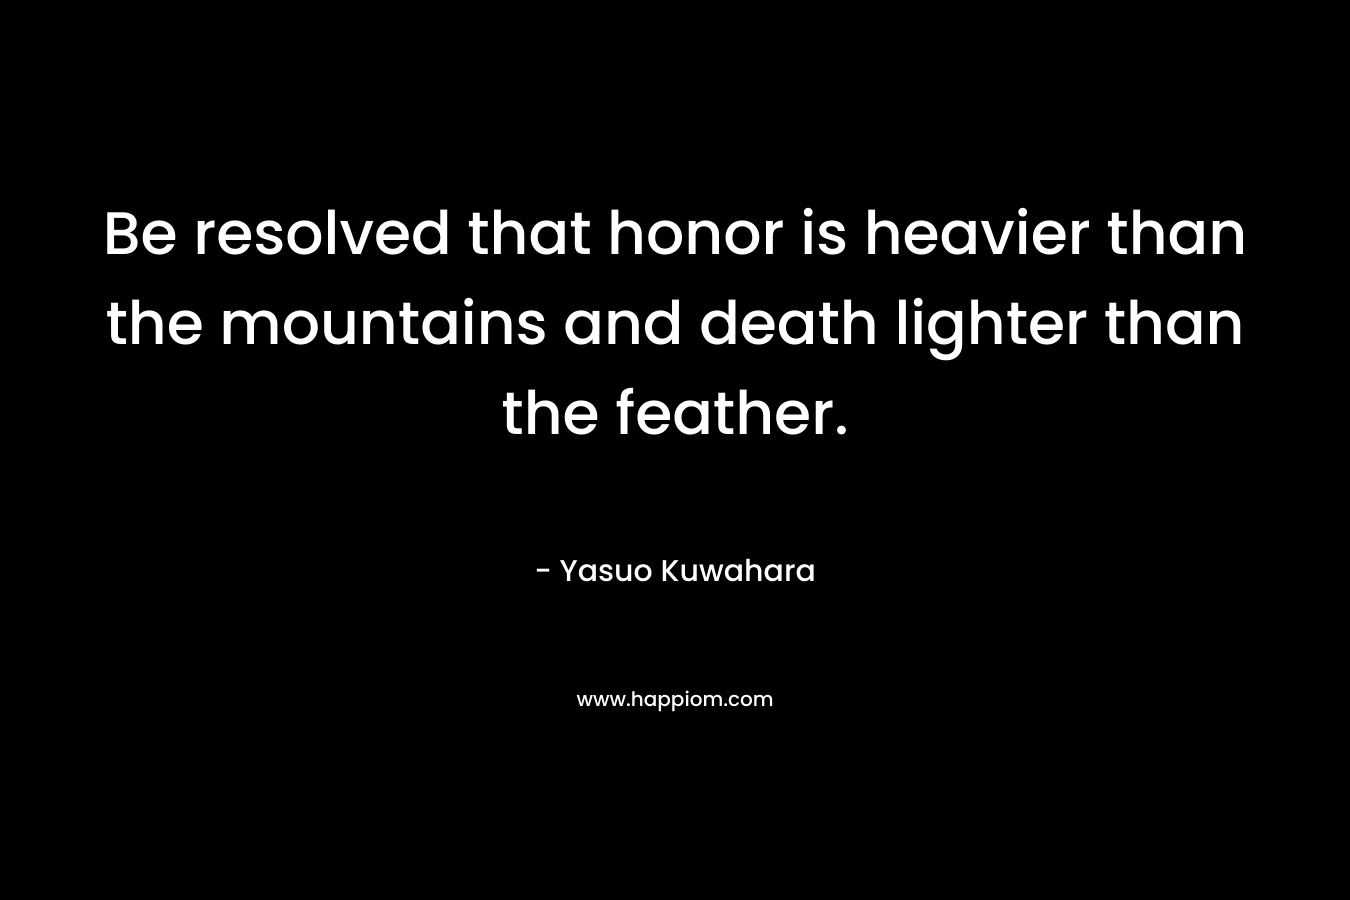 Be resolved that honor is heavier than the mountains and death lighter than the feather.